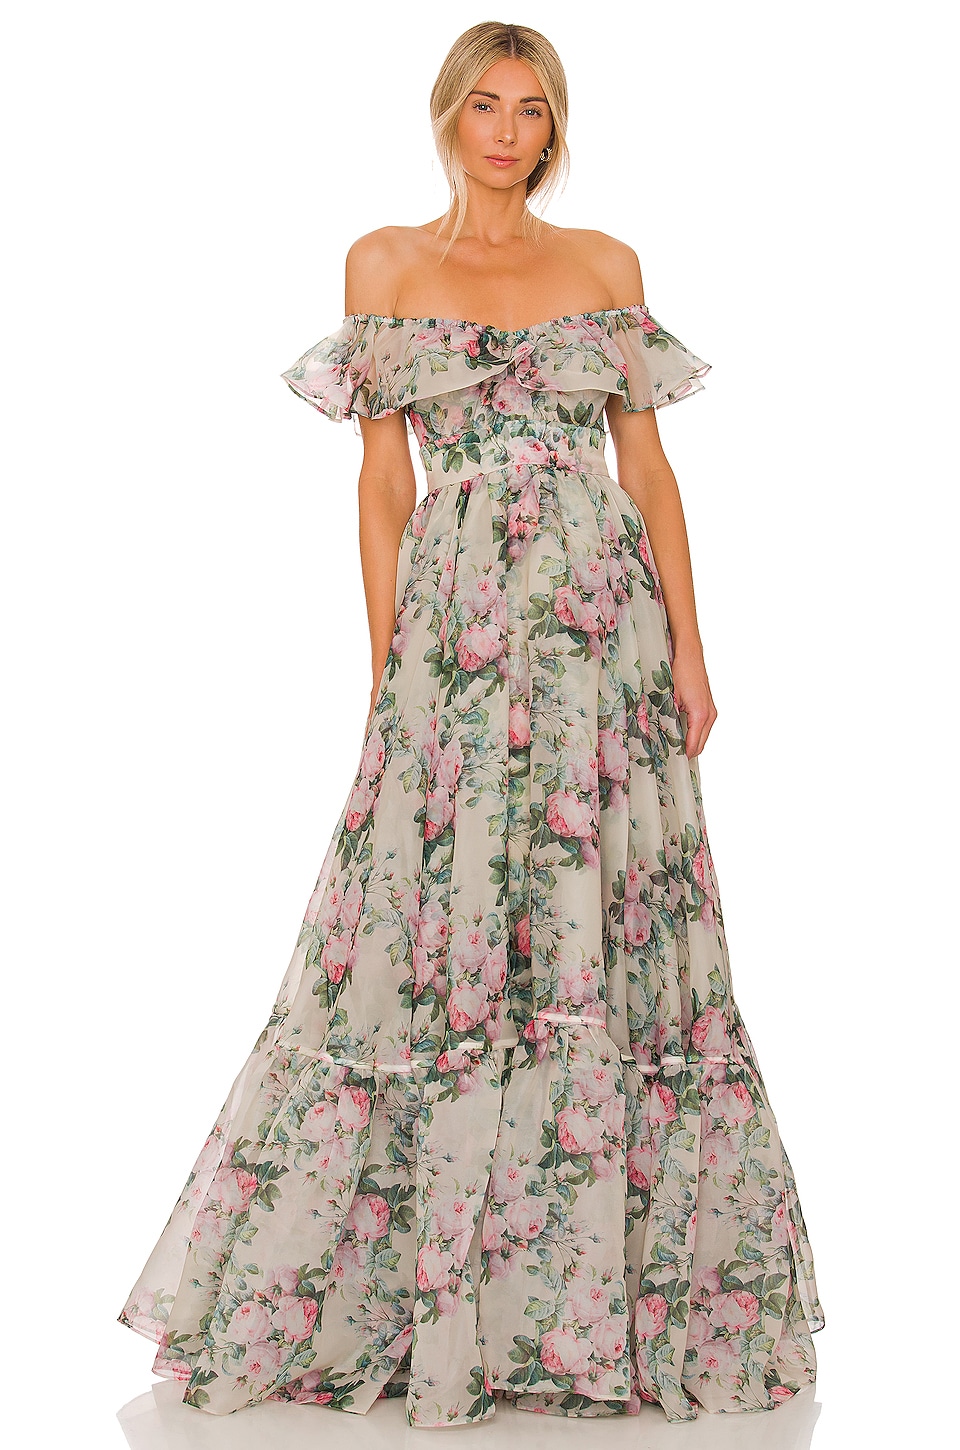 Long floral maxi dress from Selkie